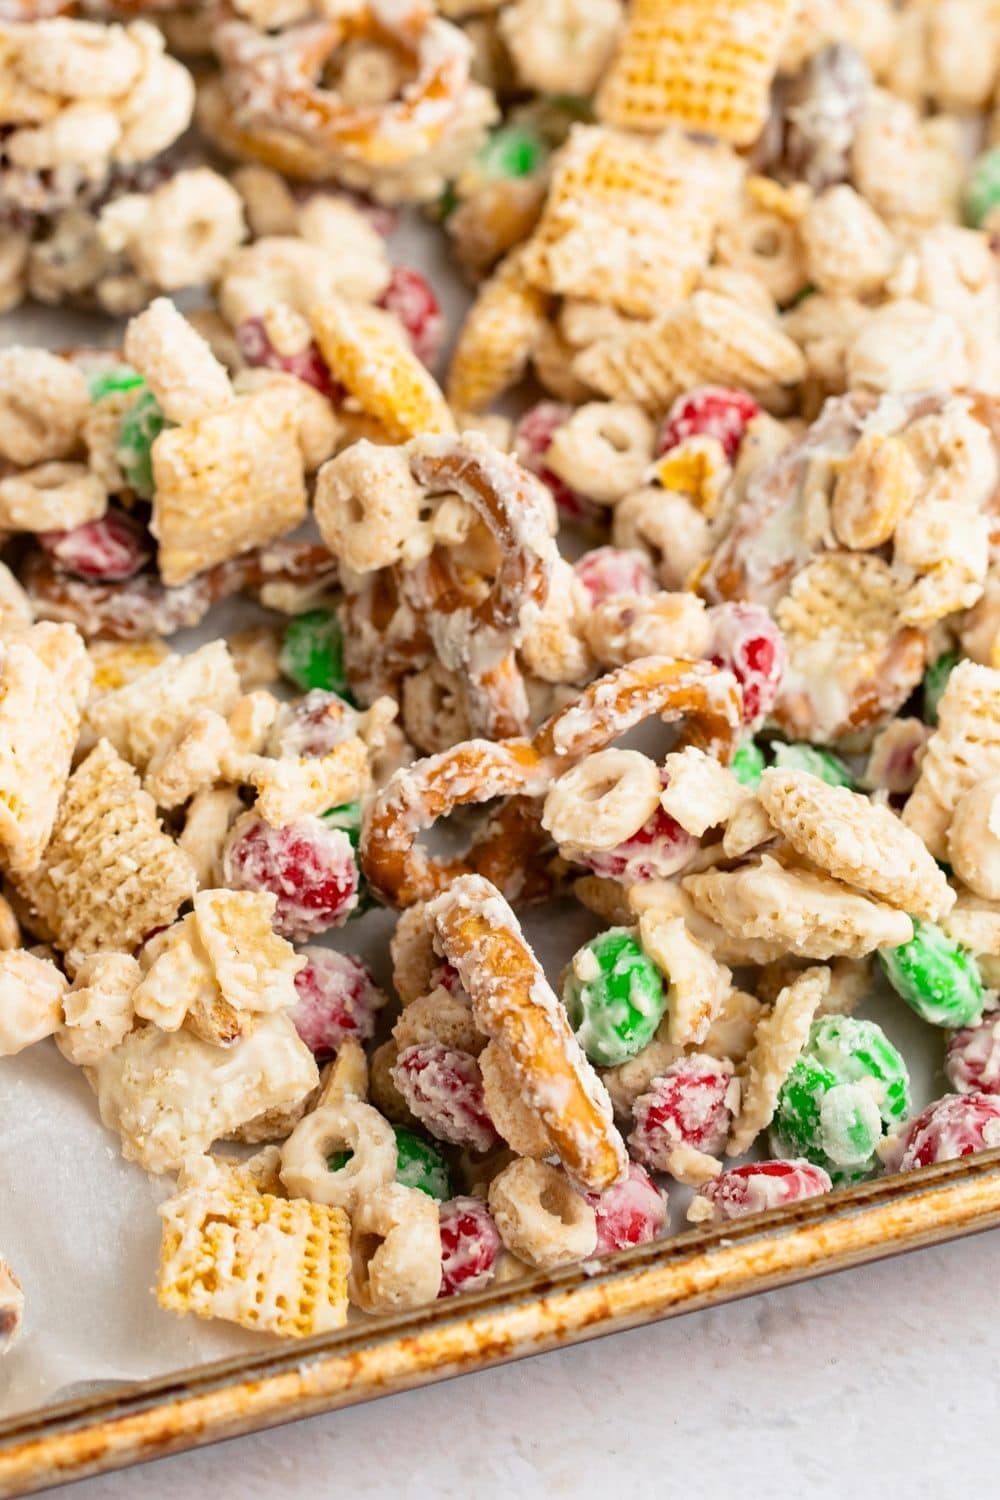 Chex mix, nuts, pretzels, and M&M candies, all coated in smooth, melting white chocolate served on a baking tray.